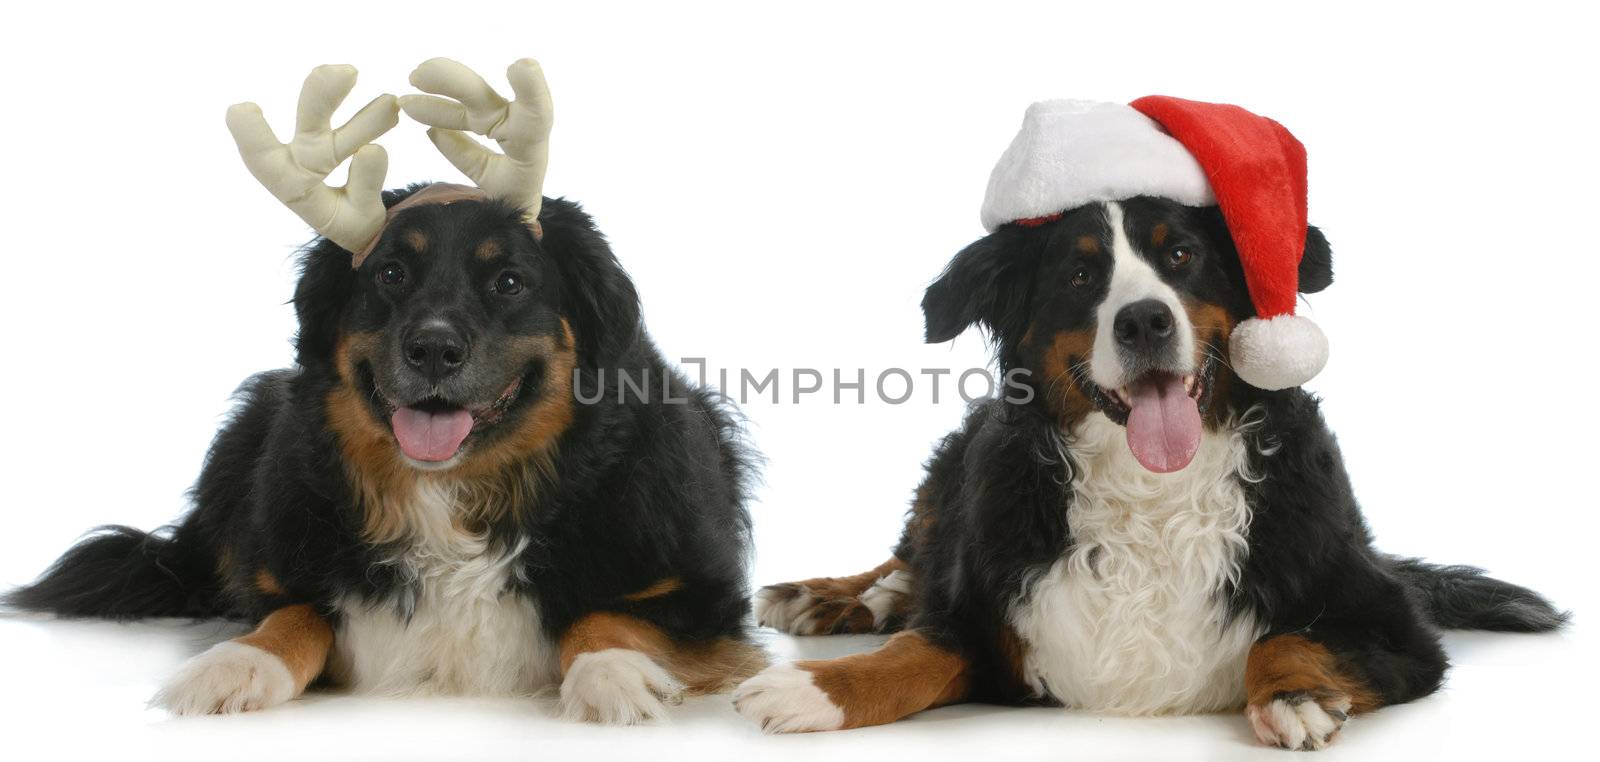 santa and rudolph dogs by willeecole123